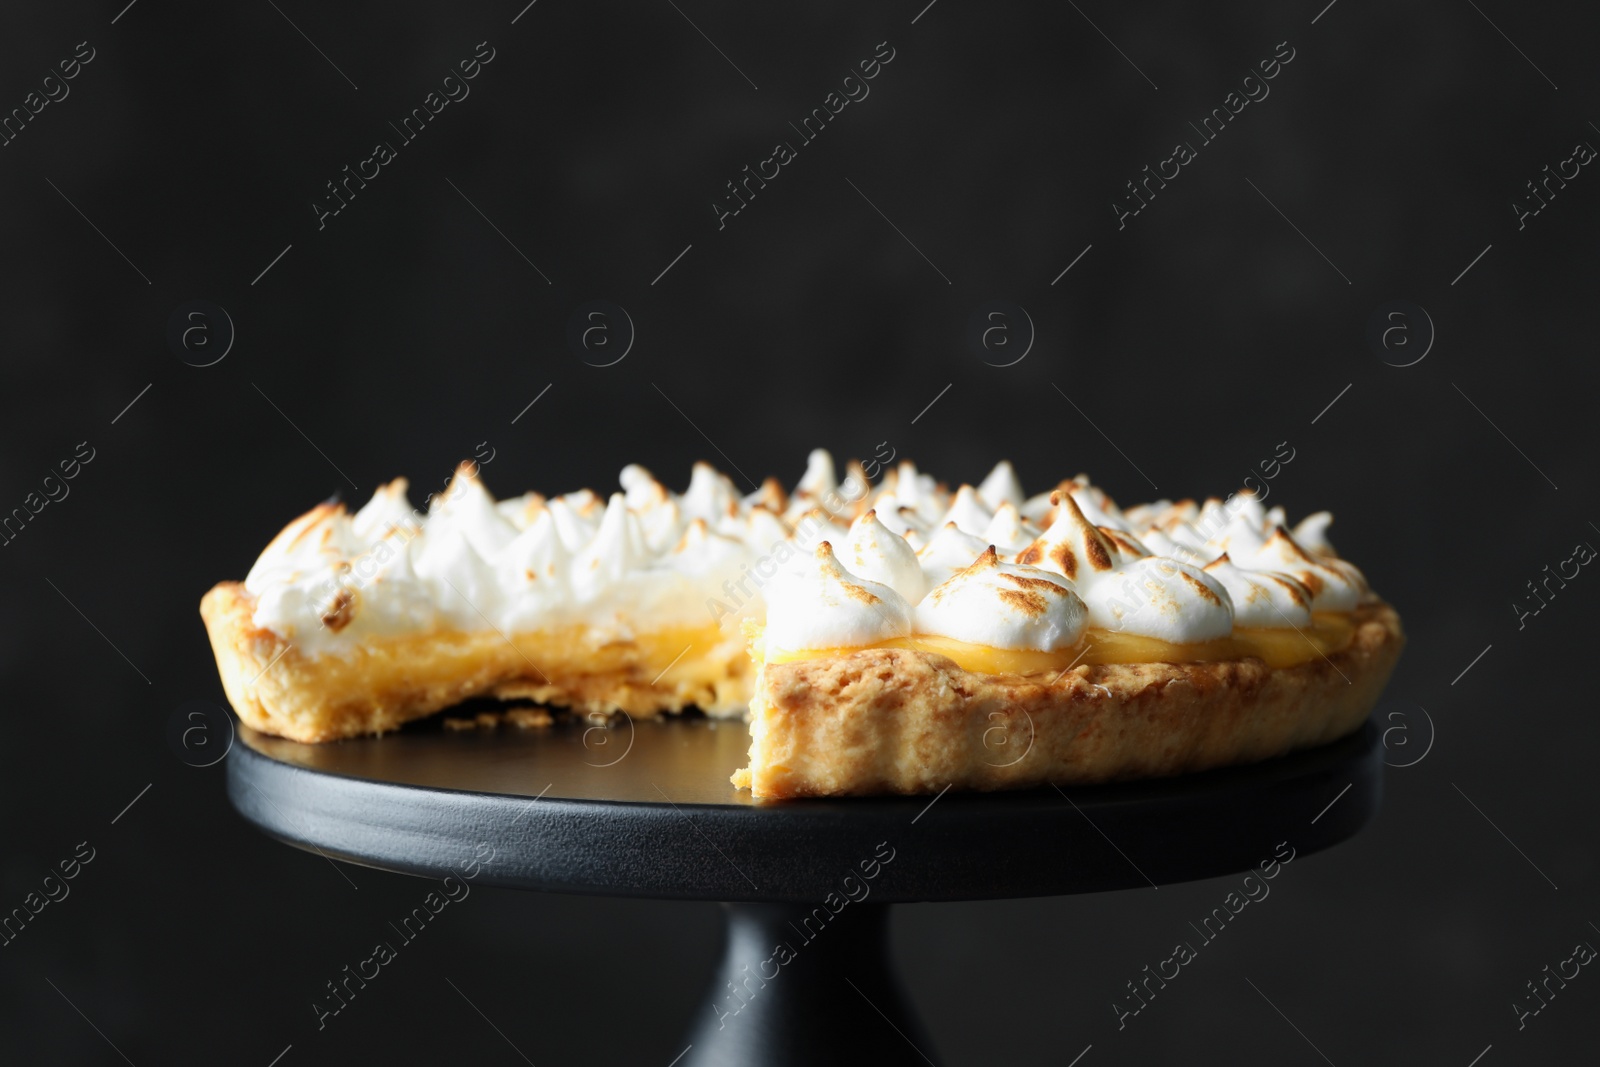 Photo of Stand with delicious lemon meringue pie on black background